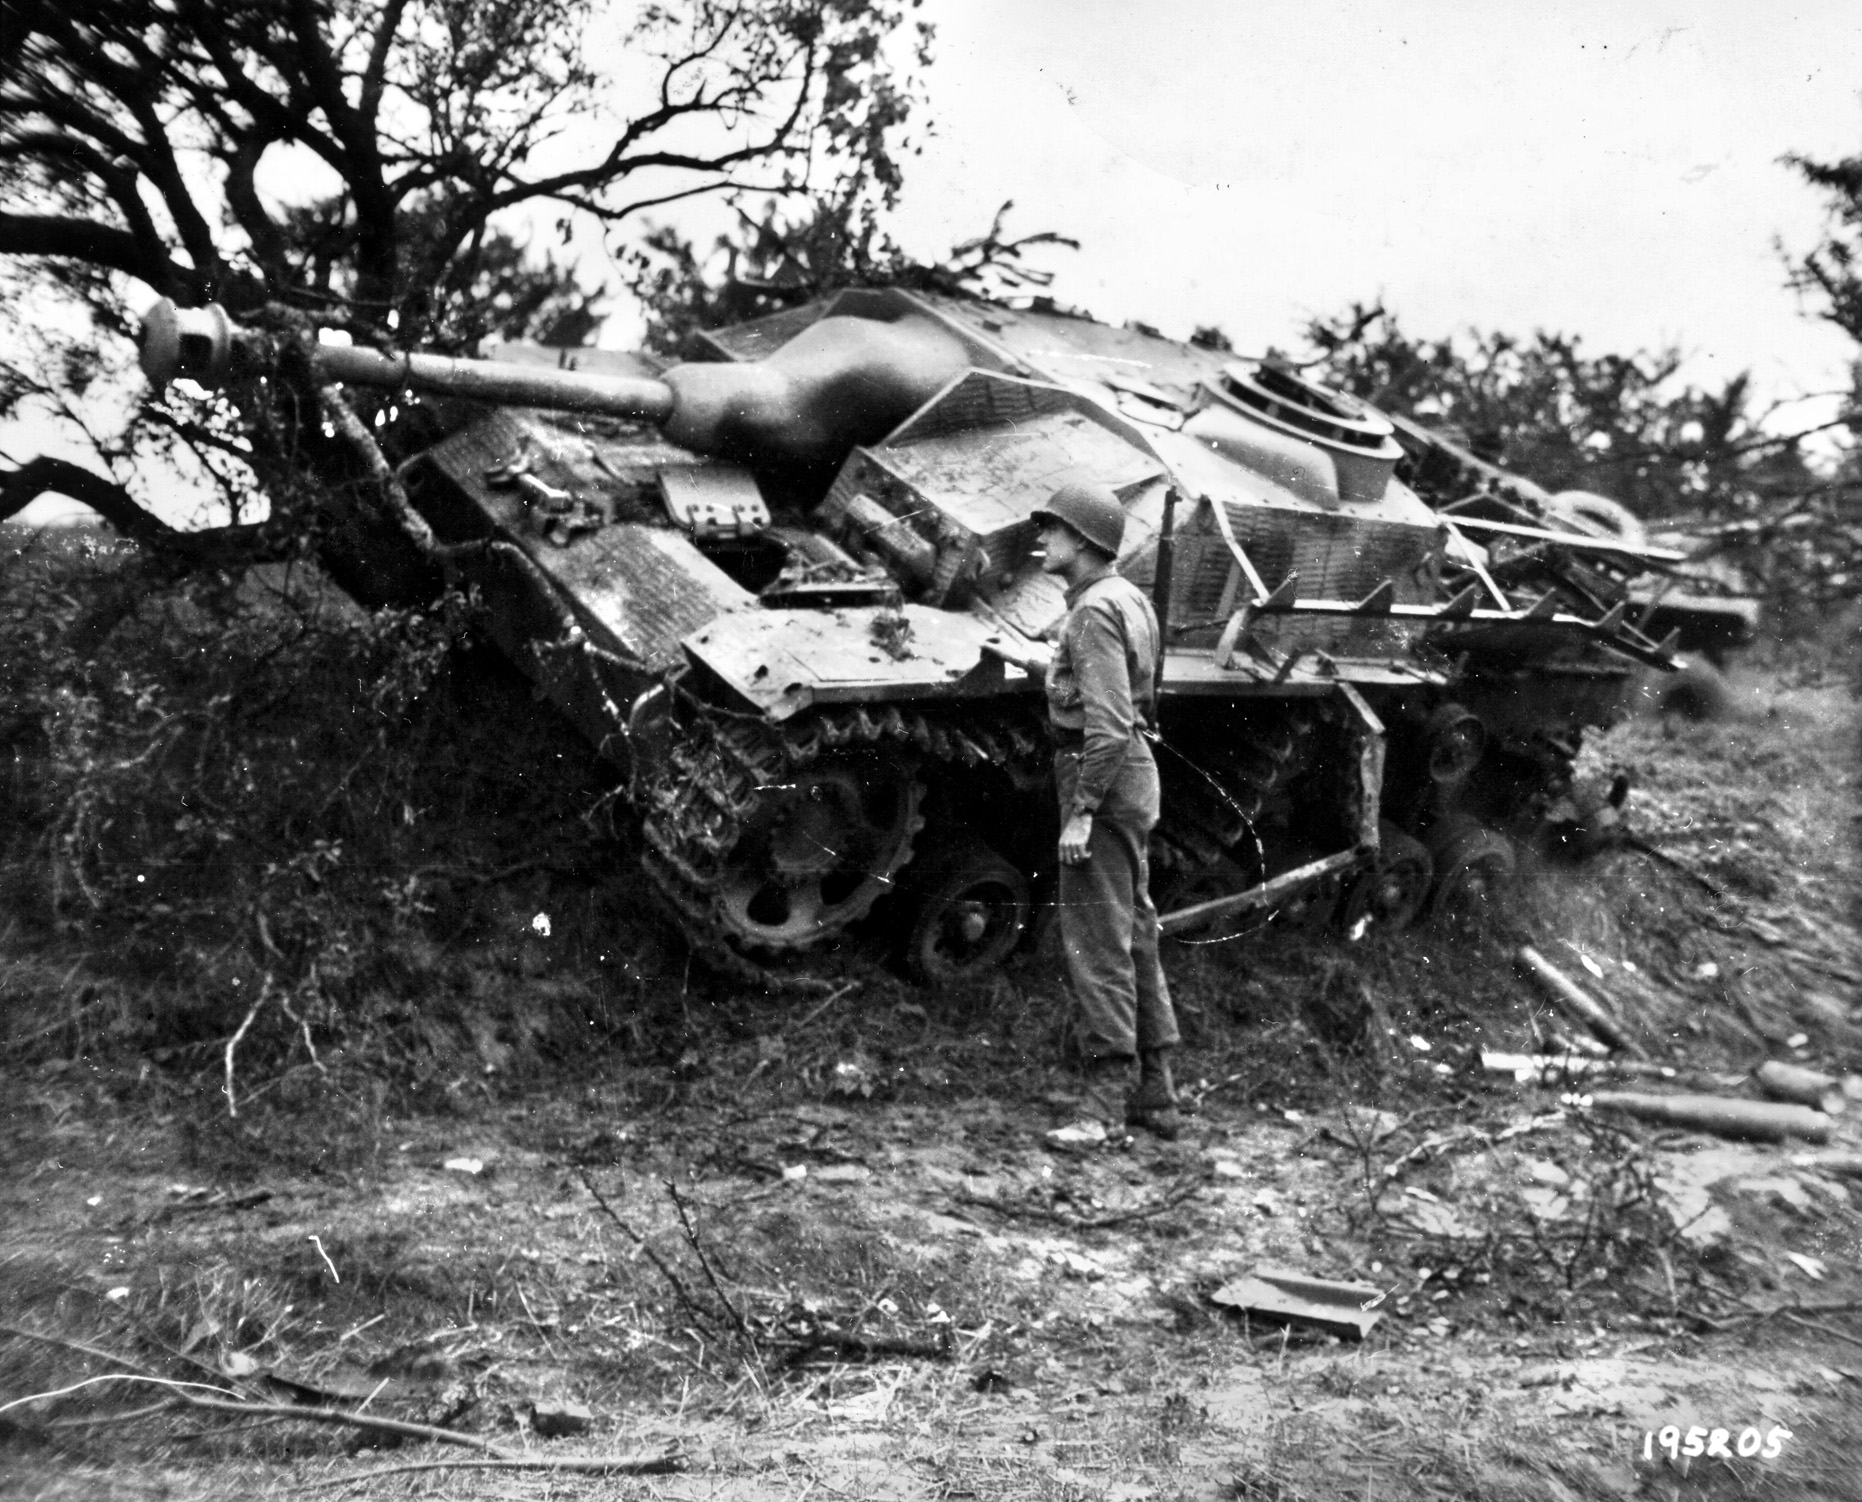 A GI examines a knocked-out Sturmgeschutz III assault gun south of Rechicourt. Such vehicles often replaced the more effective tanks in the depleted German forces in late 1944.